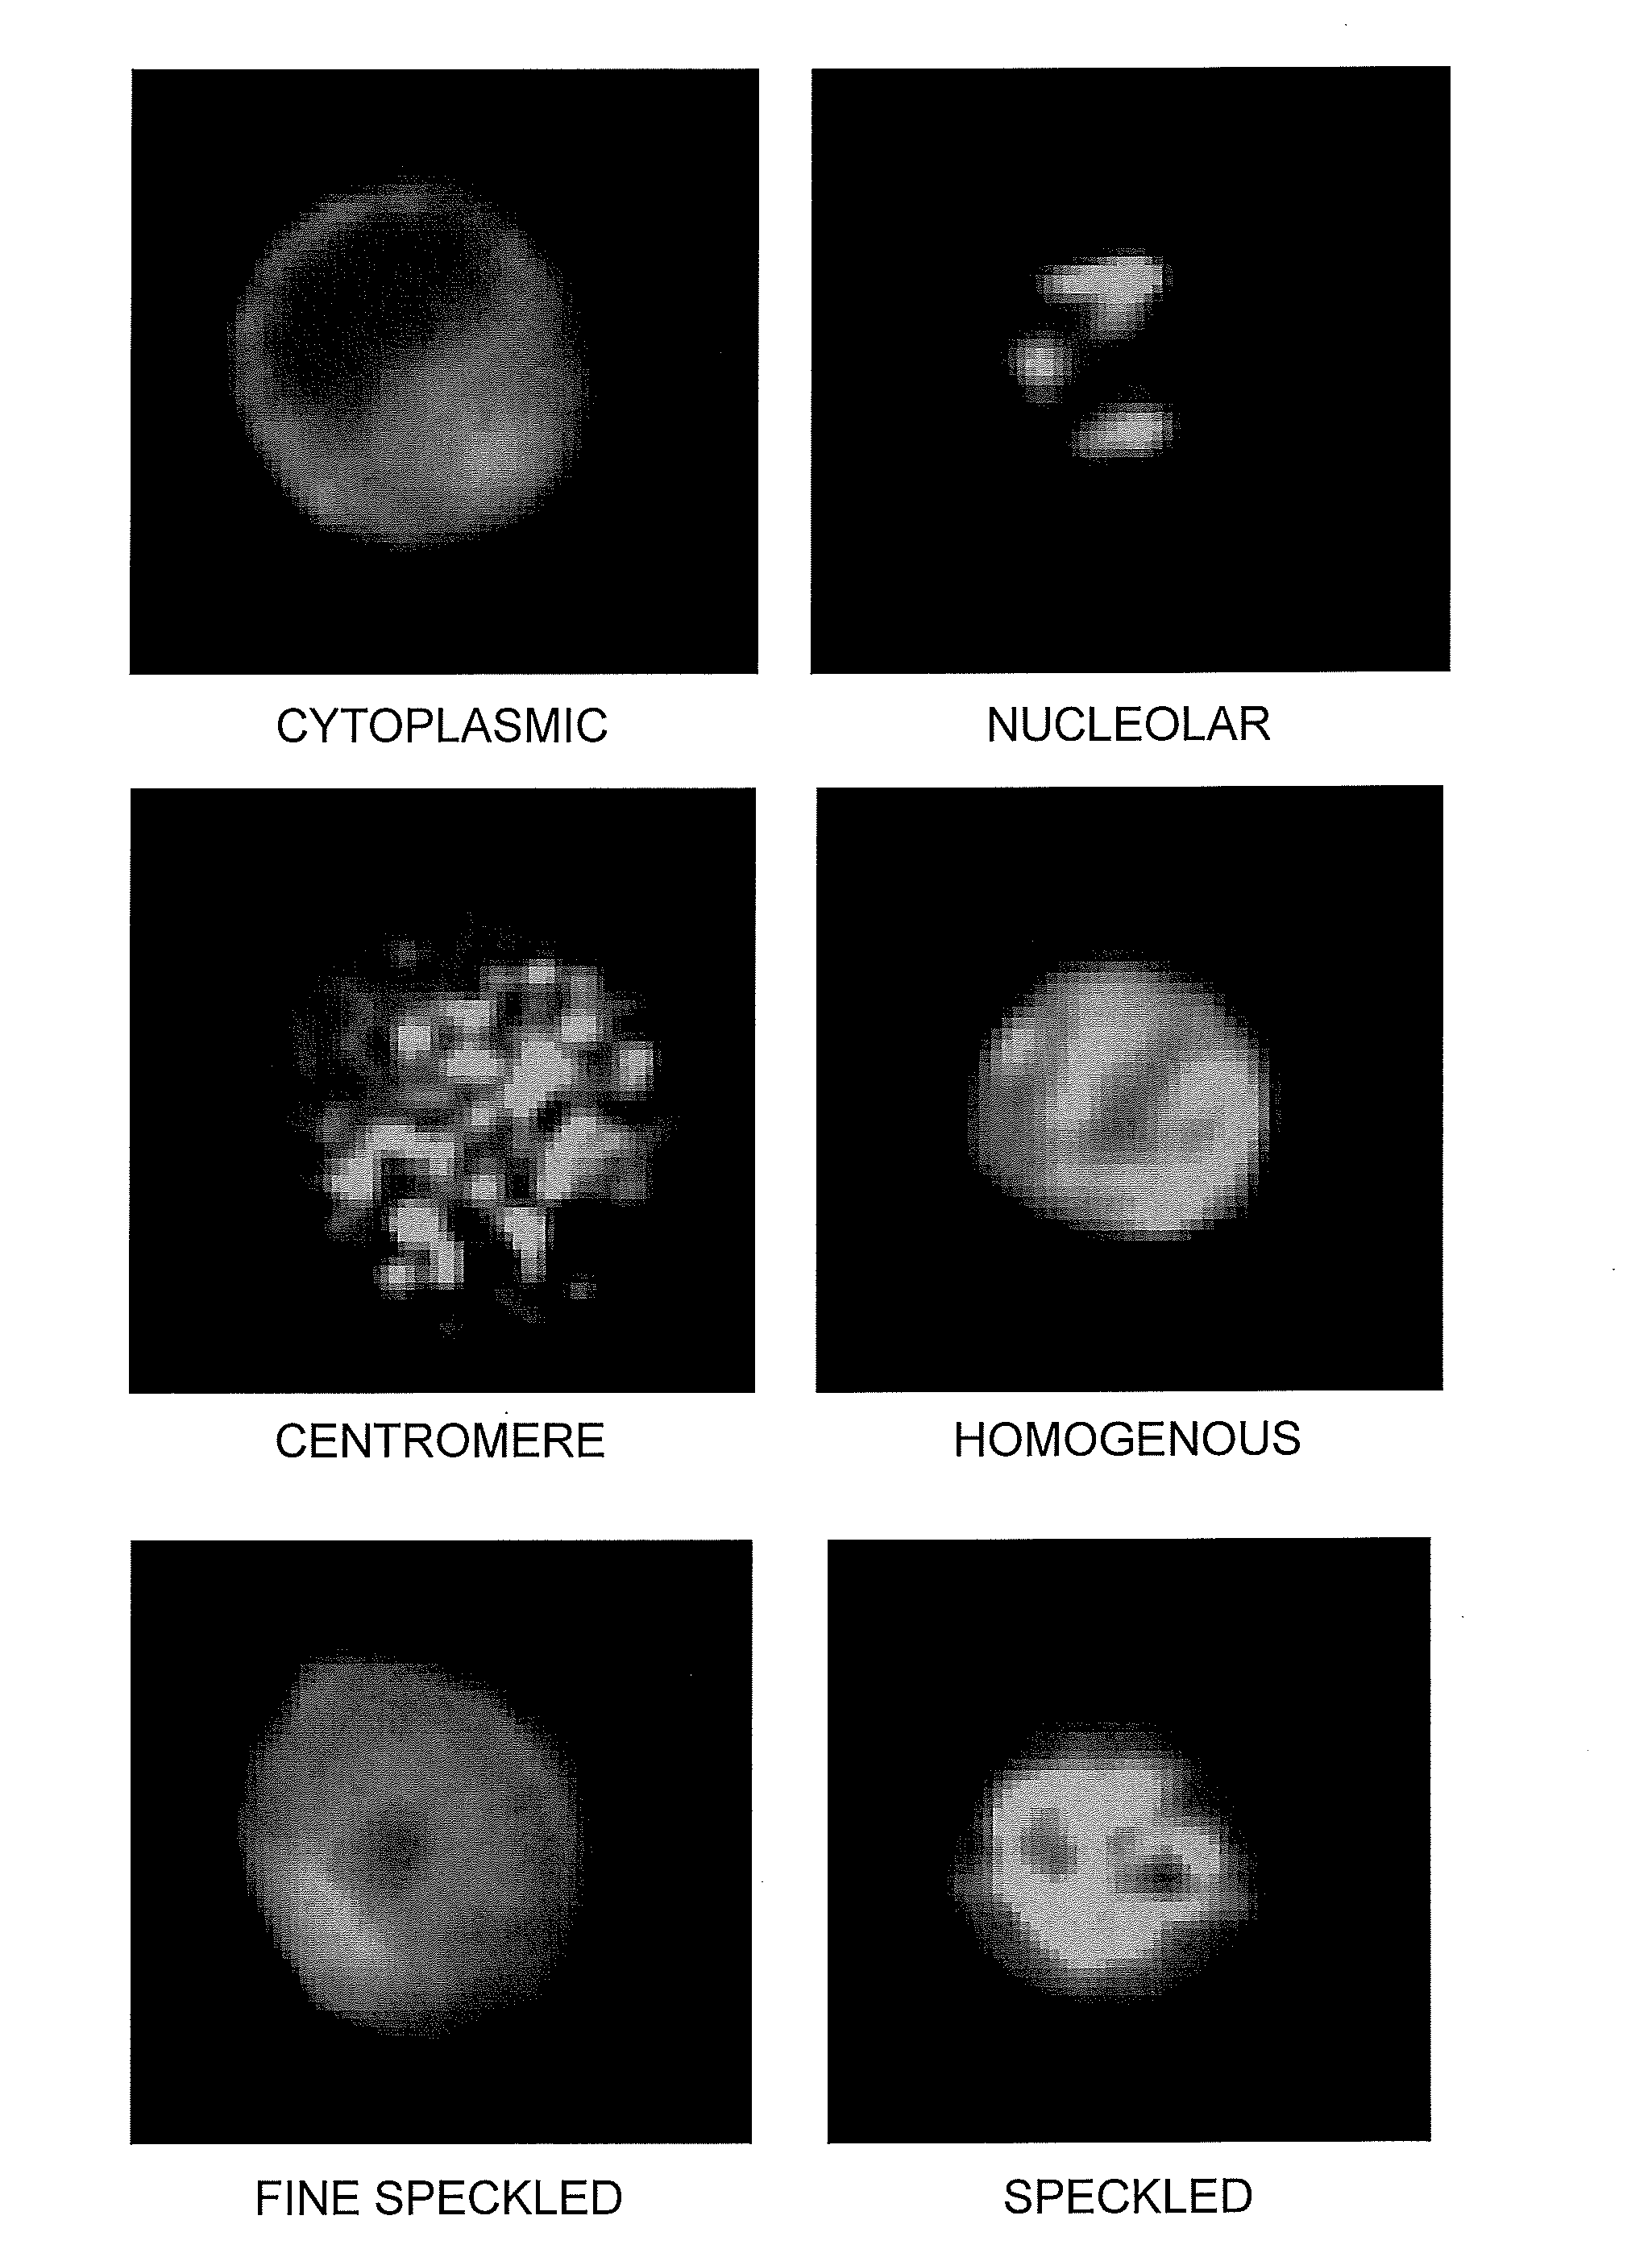 Method for Automated Autoantibody Detection and Identification